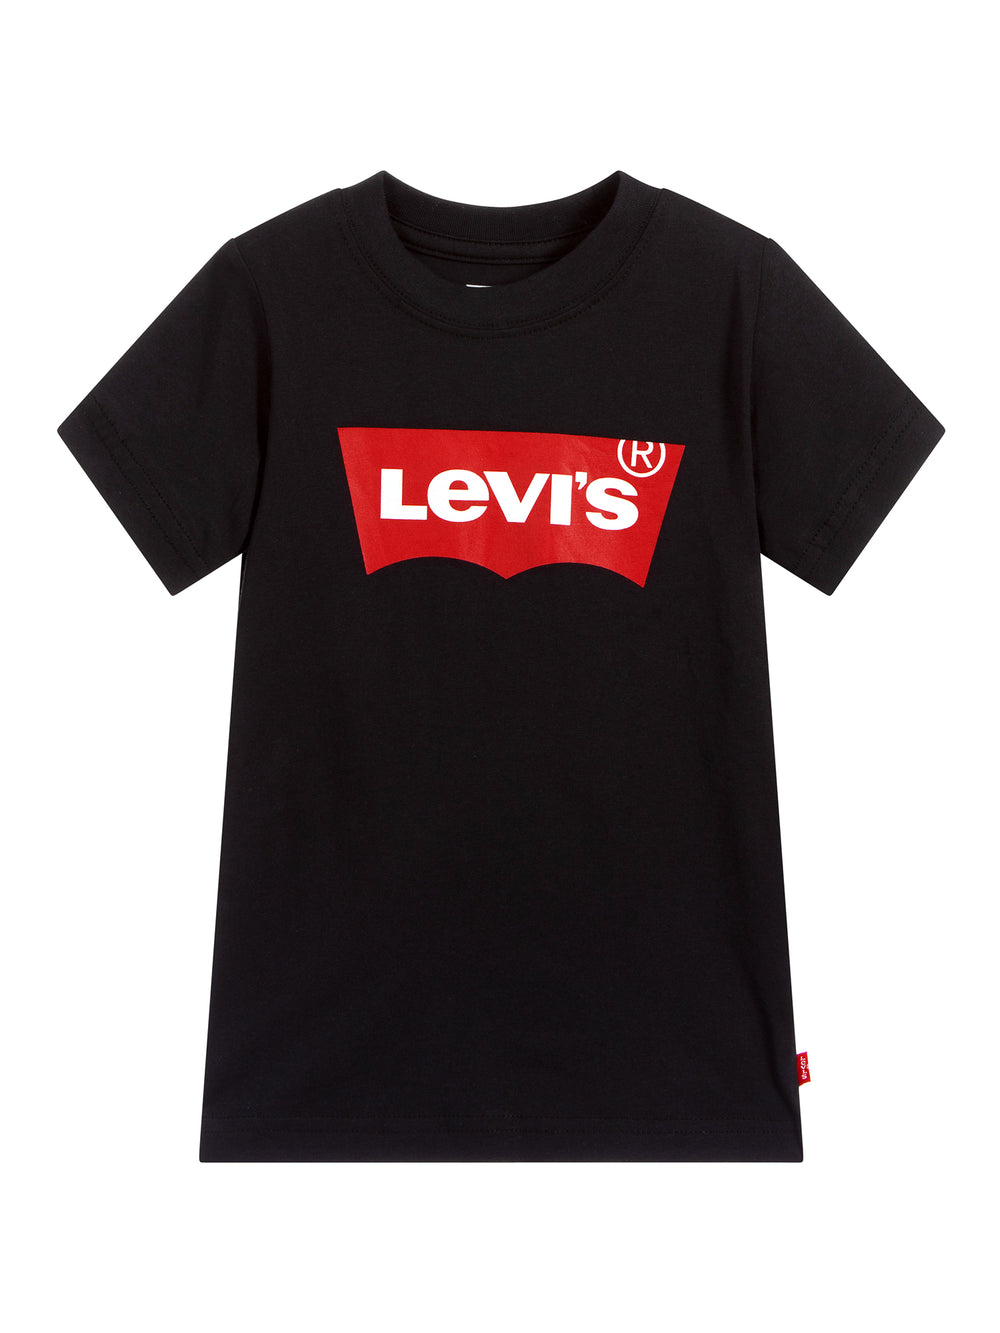 KIDS LEVIS YOUTH BOYS BATWING T-SHIRT